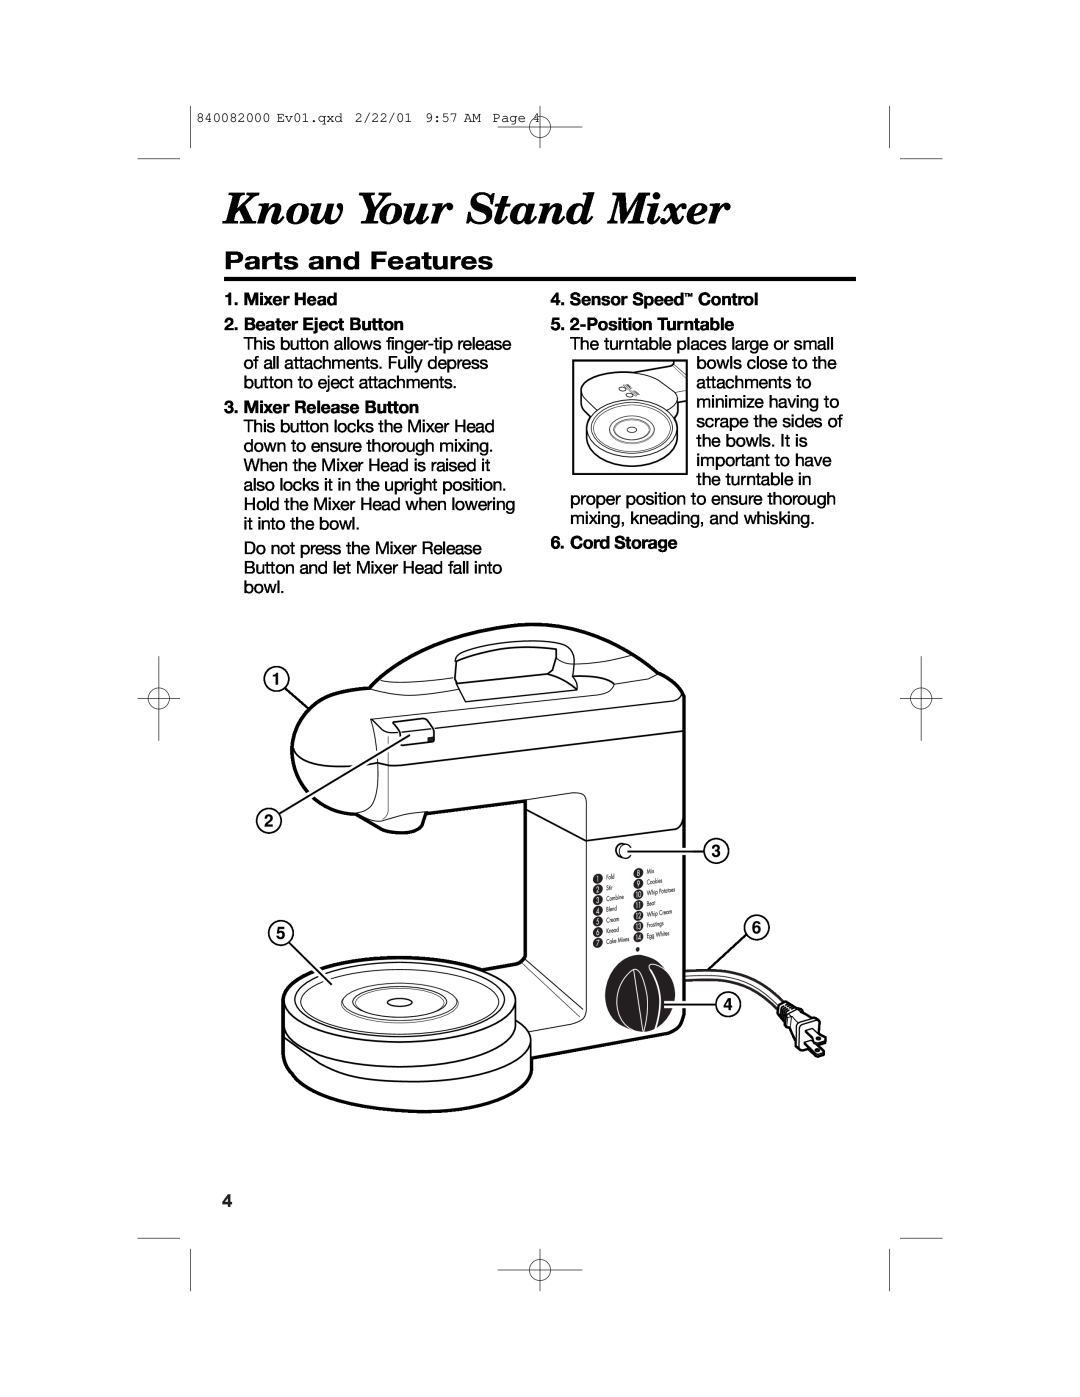 Hamilton Beach 60695 Know Your Stand Mixer, Parts and Features, Mixer Head 2.Beater Eject Button, Mixer Release Button 